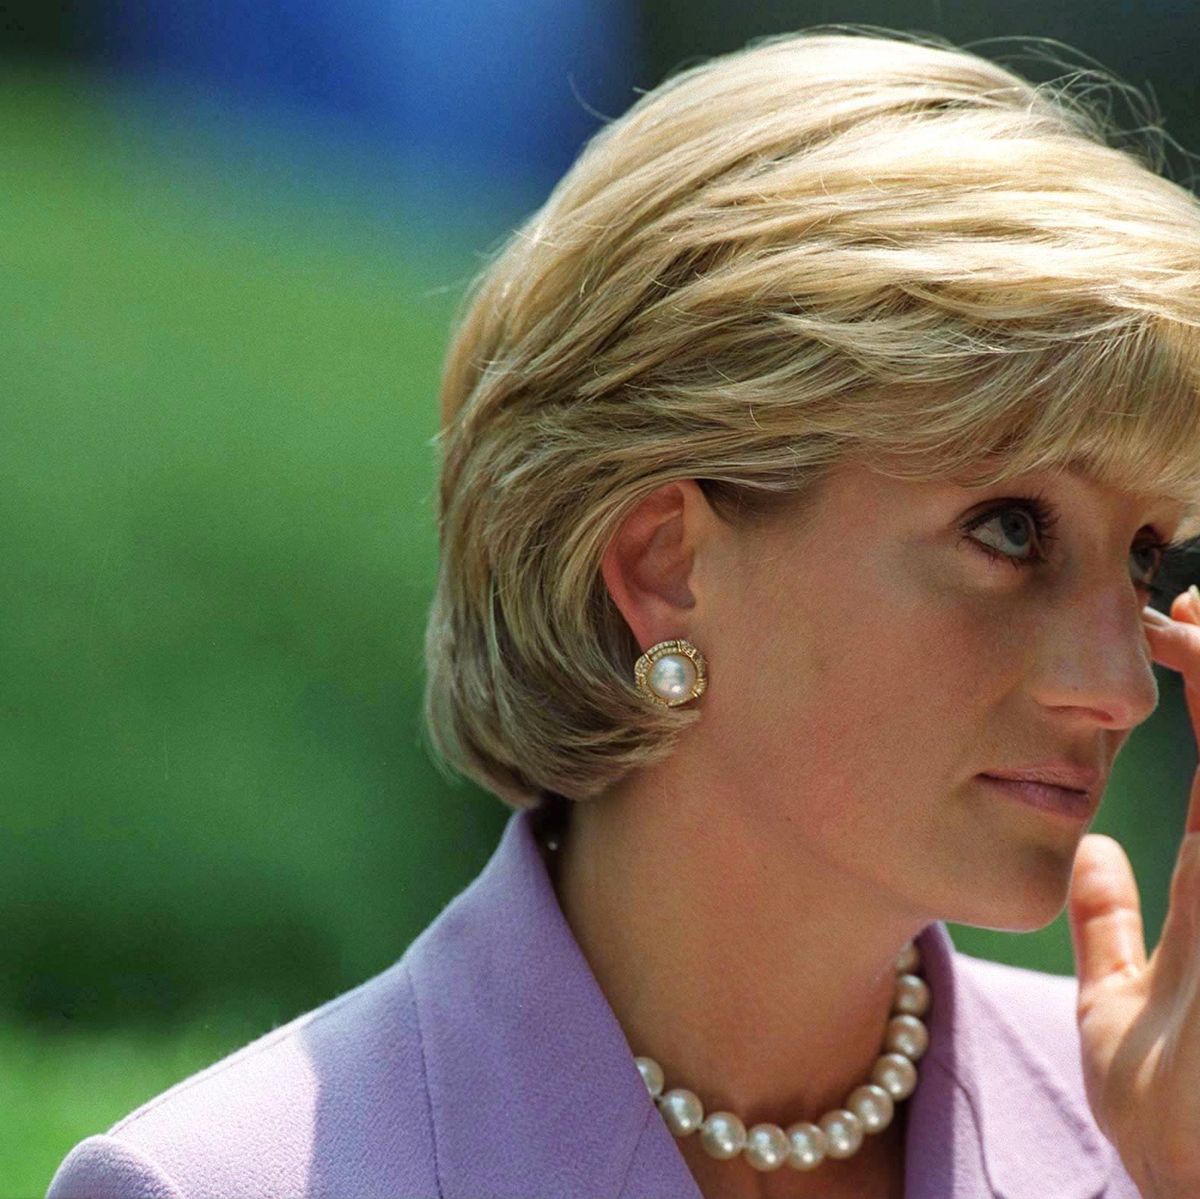 washington, united states june 17 diana, princess of wales, making an anti landmines speech at the red cross headquarters in washington photo by tim grahamgetty images